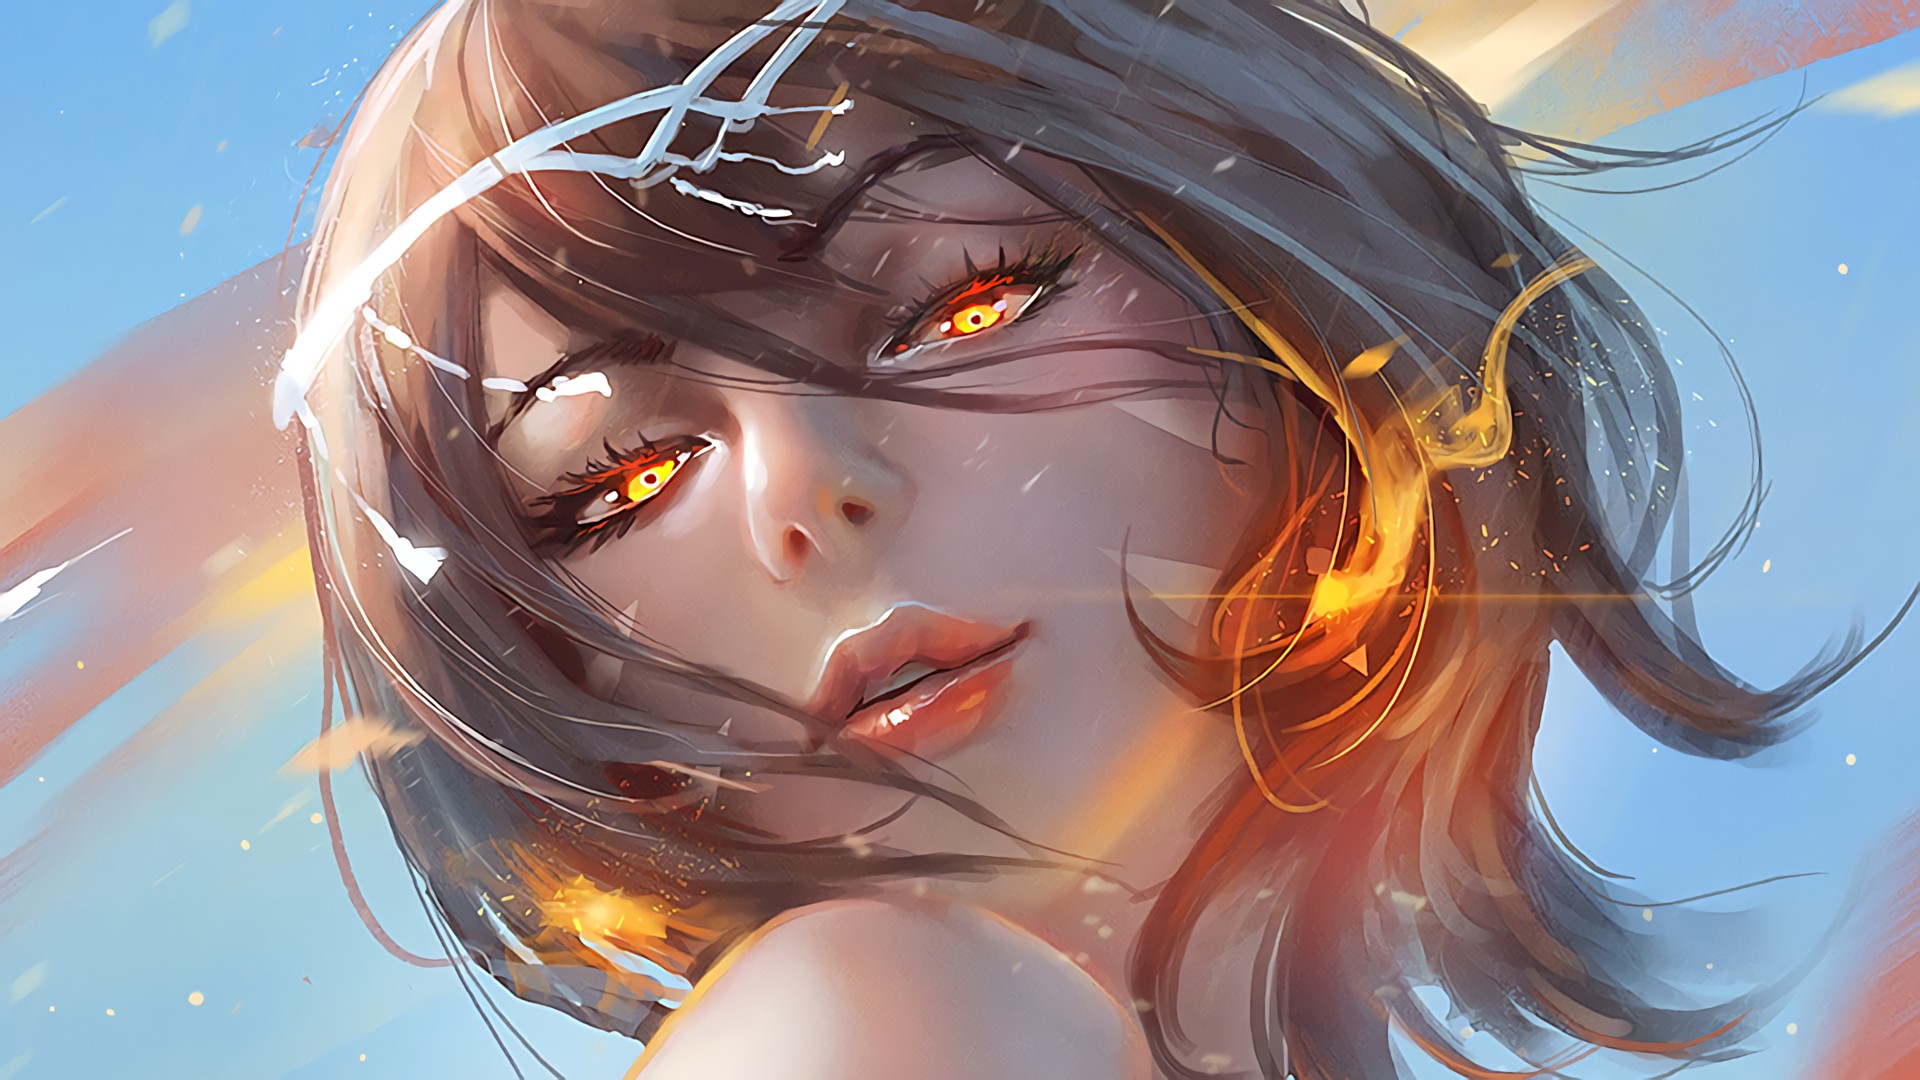 Anime 1920x1080 anime girls fantasy art original characters fire looking at viewer face DeviantArt closeup hair in face anime women glowing eyes fantasy girl